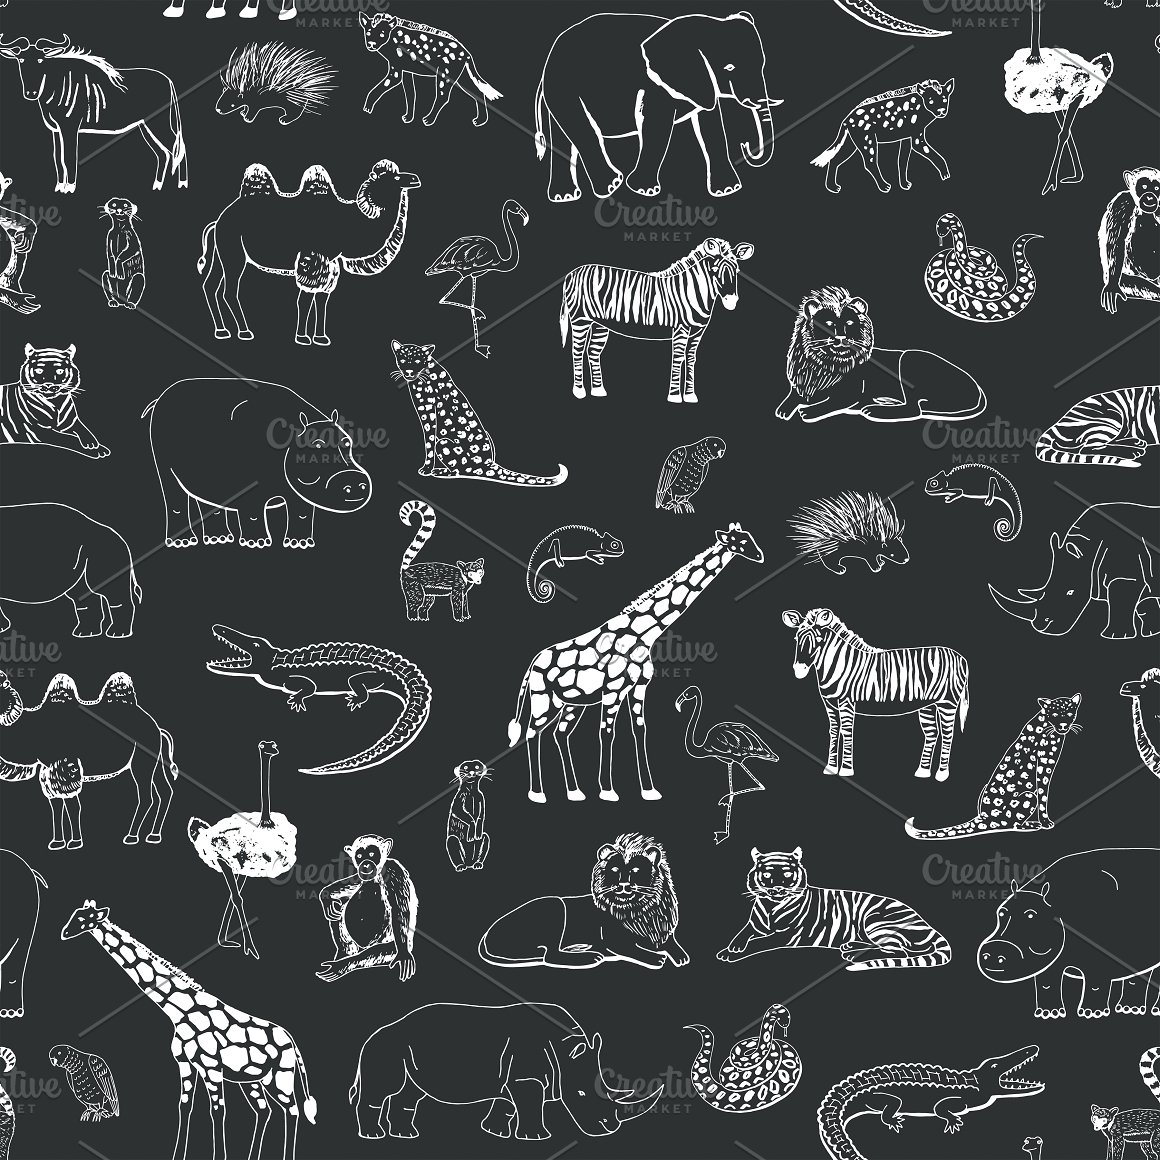 Pattern in line art of different animals on a black background.